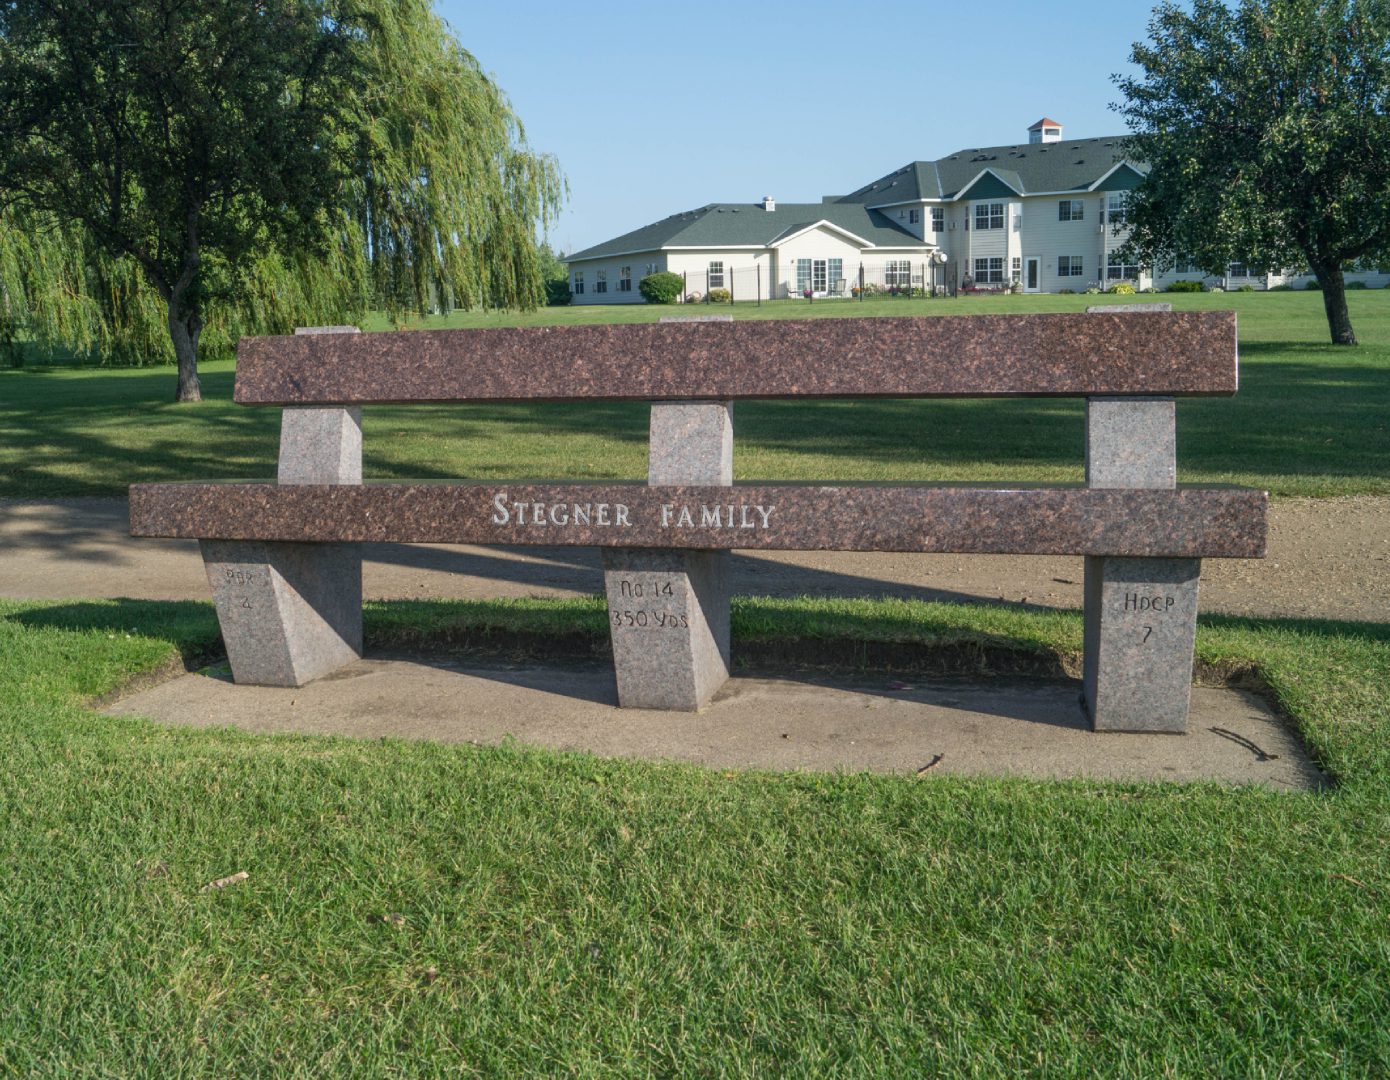 A bench in the middle of a park with grass